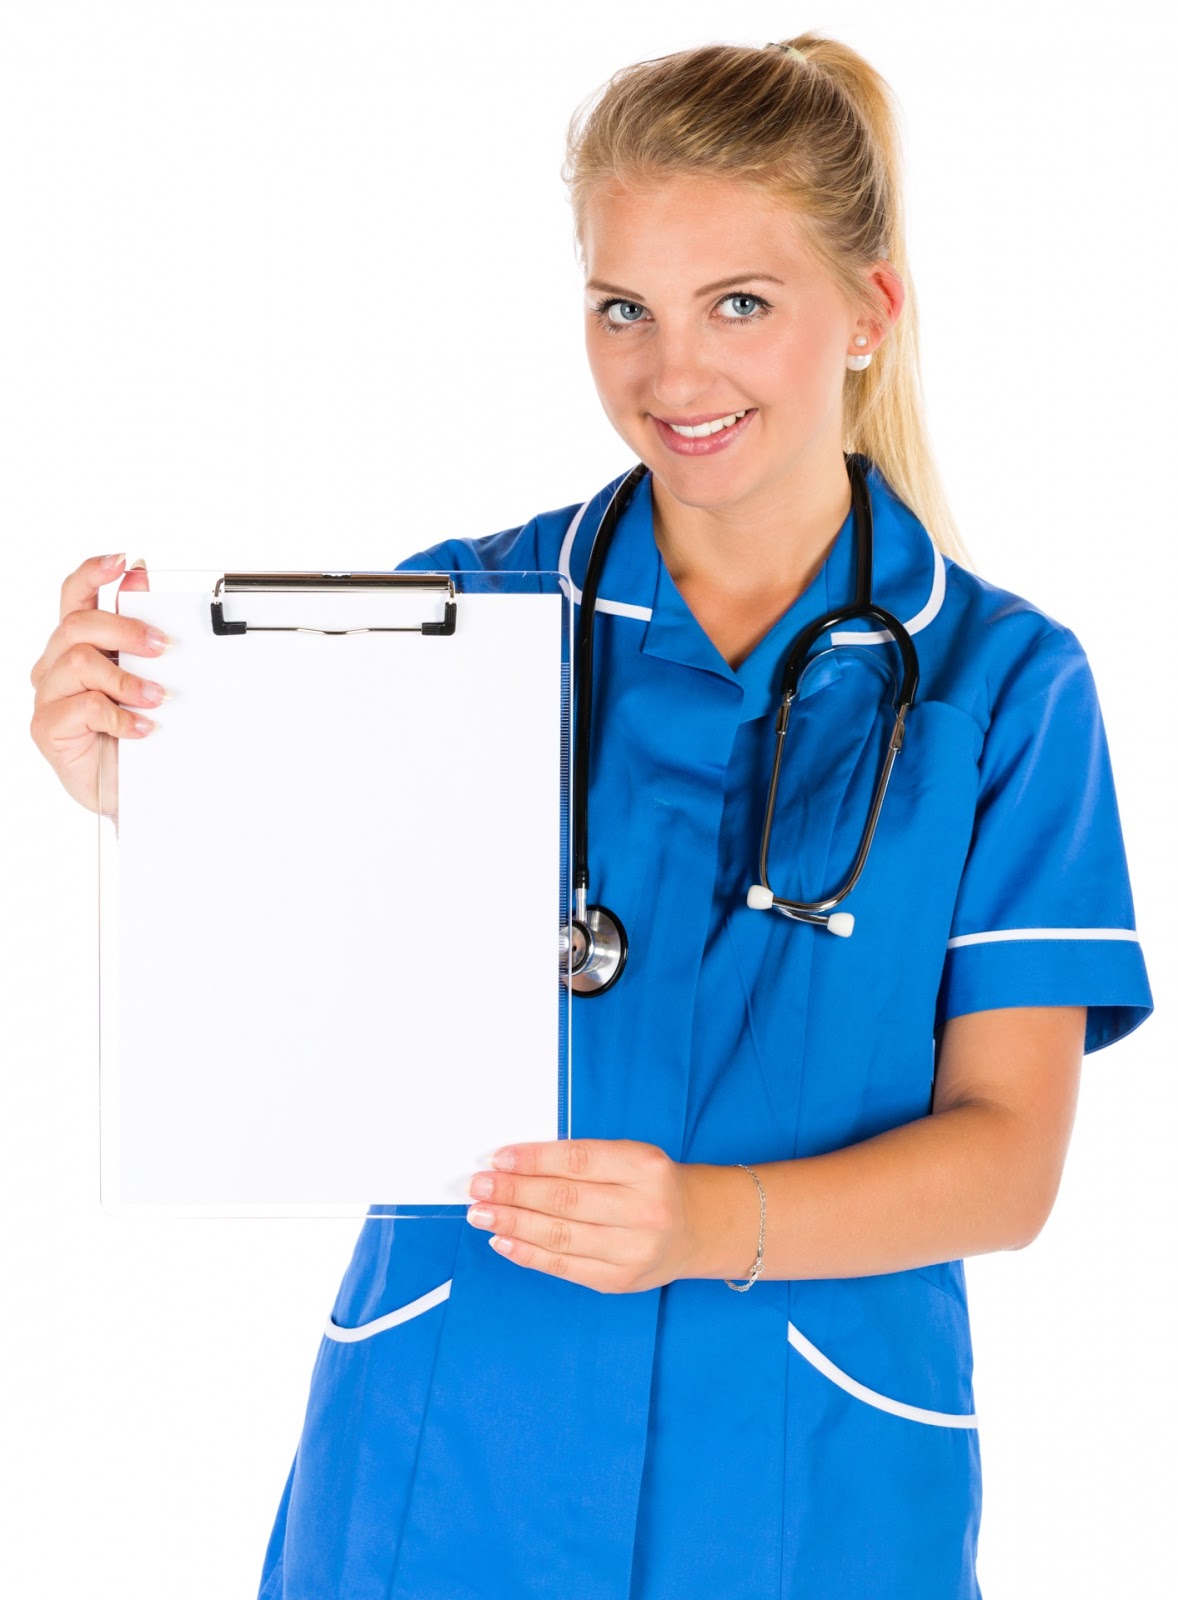 Reasons Why To A Certified Nursing Assistant? Medical Career